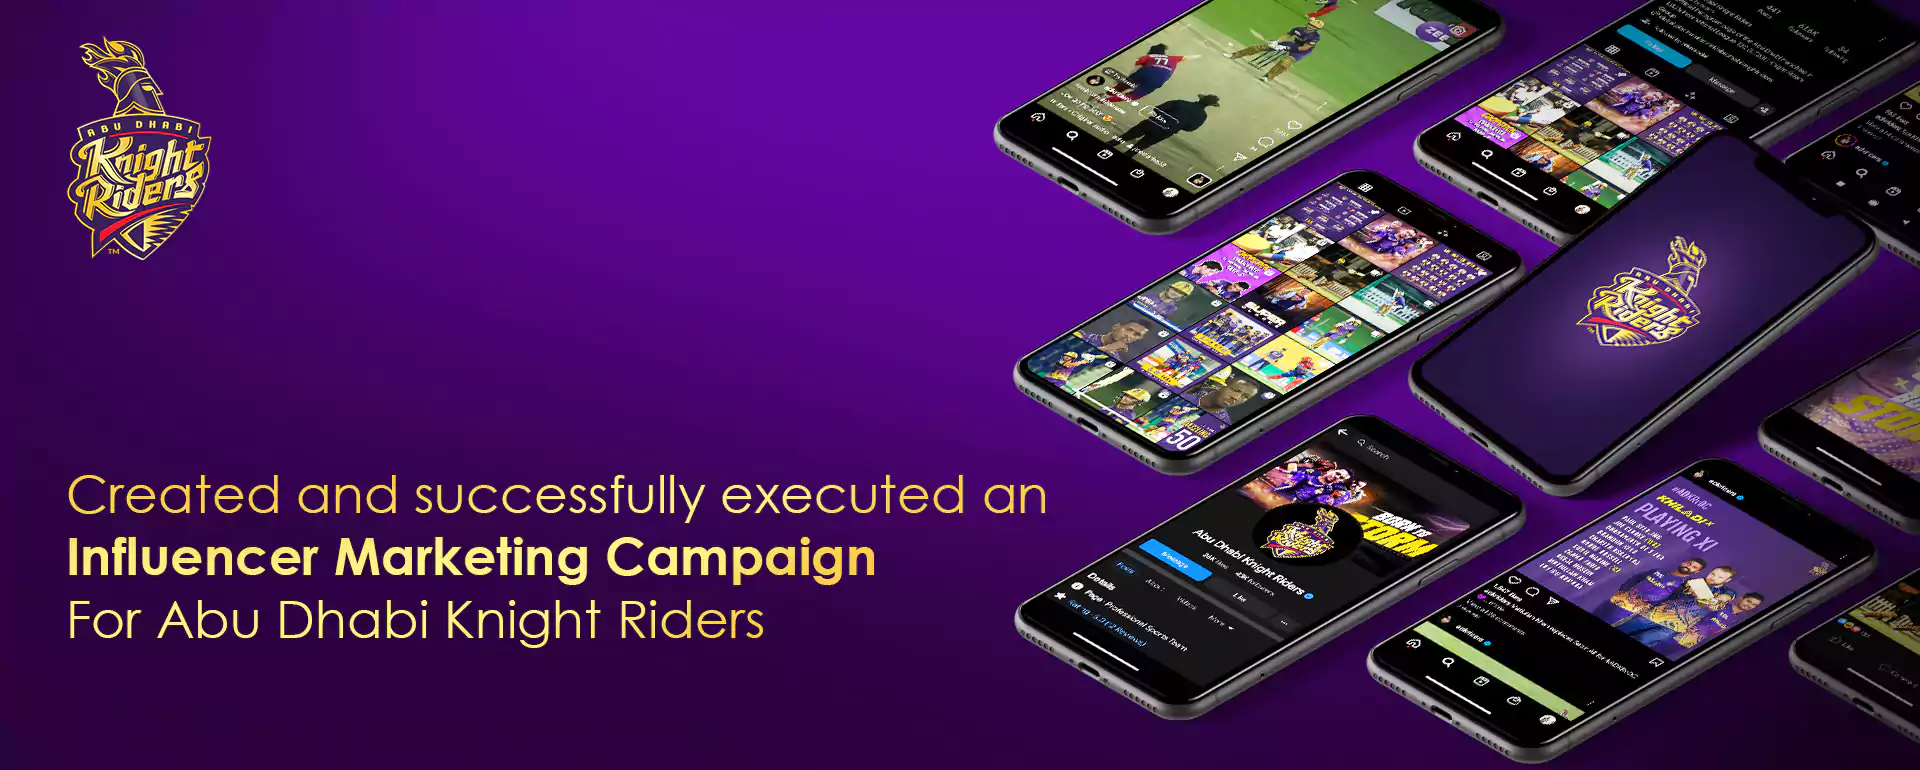 Created and Successfully executed an Influencer Marketing Campaign For Abu Dhabi Knight Riders